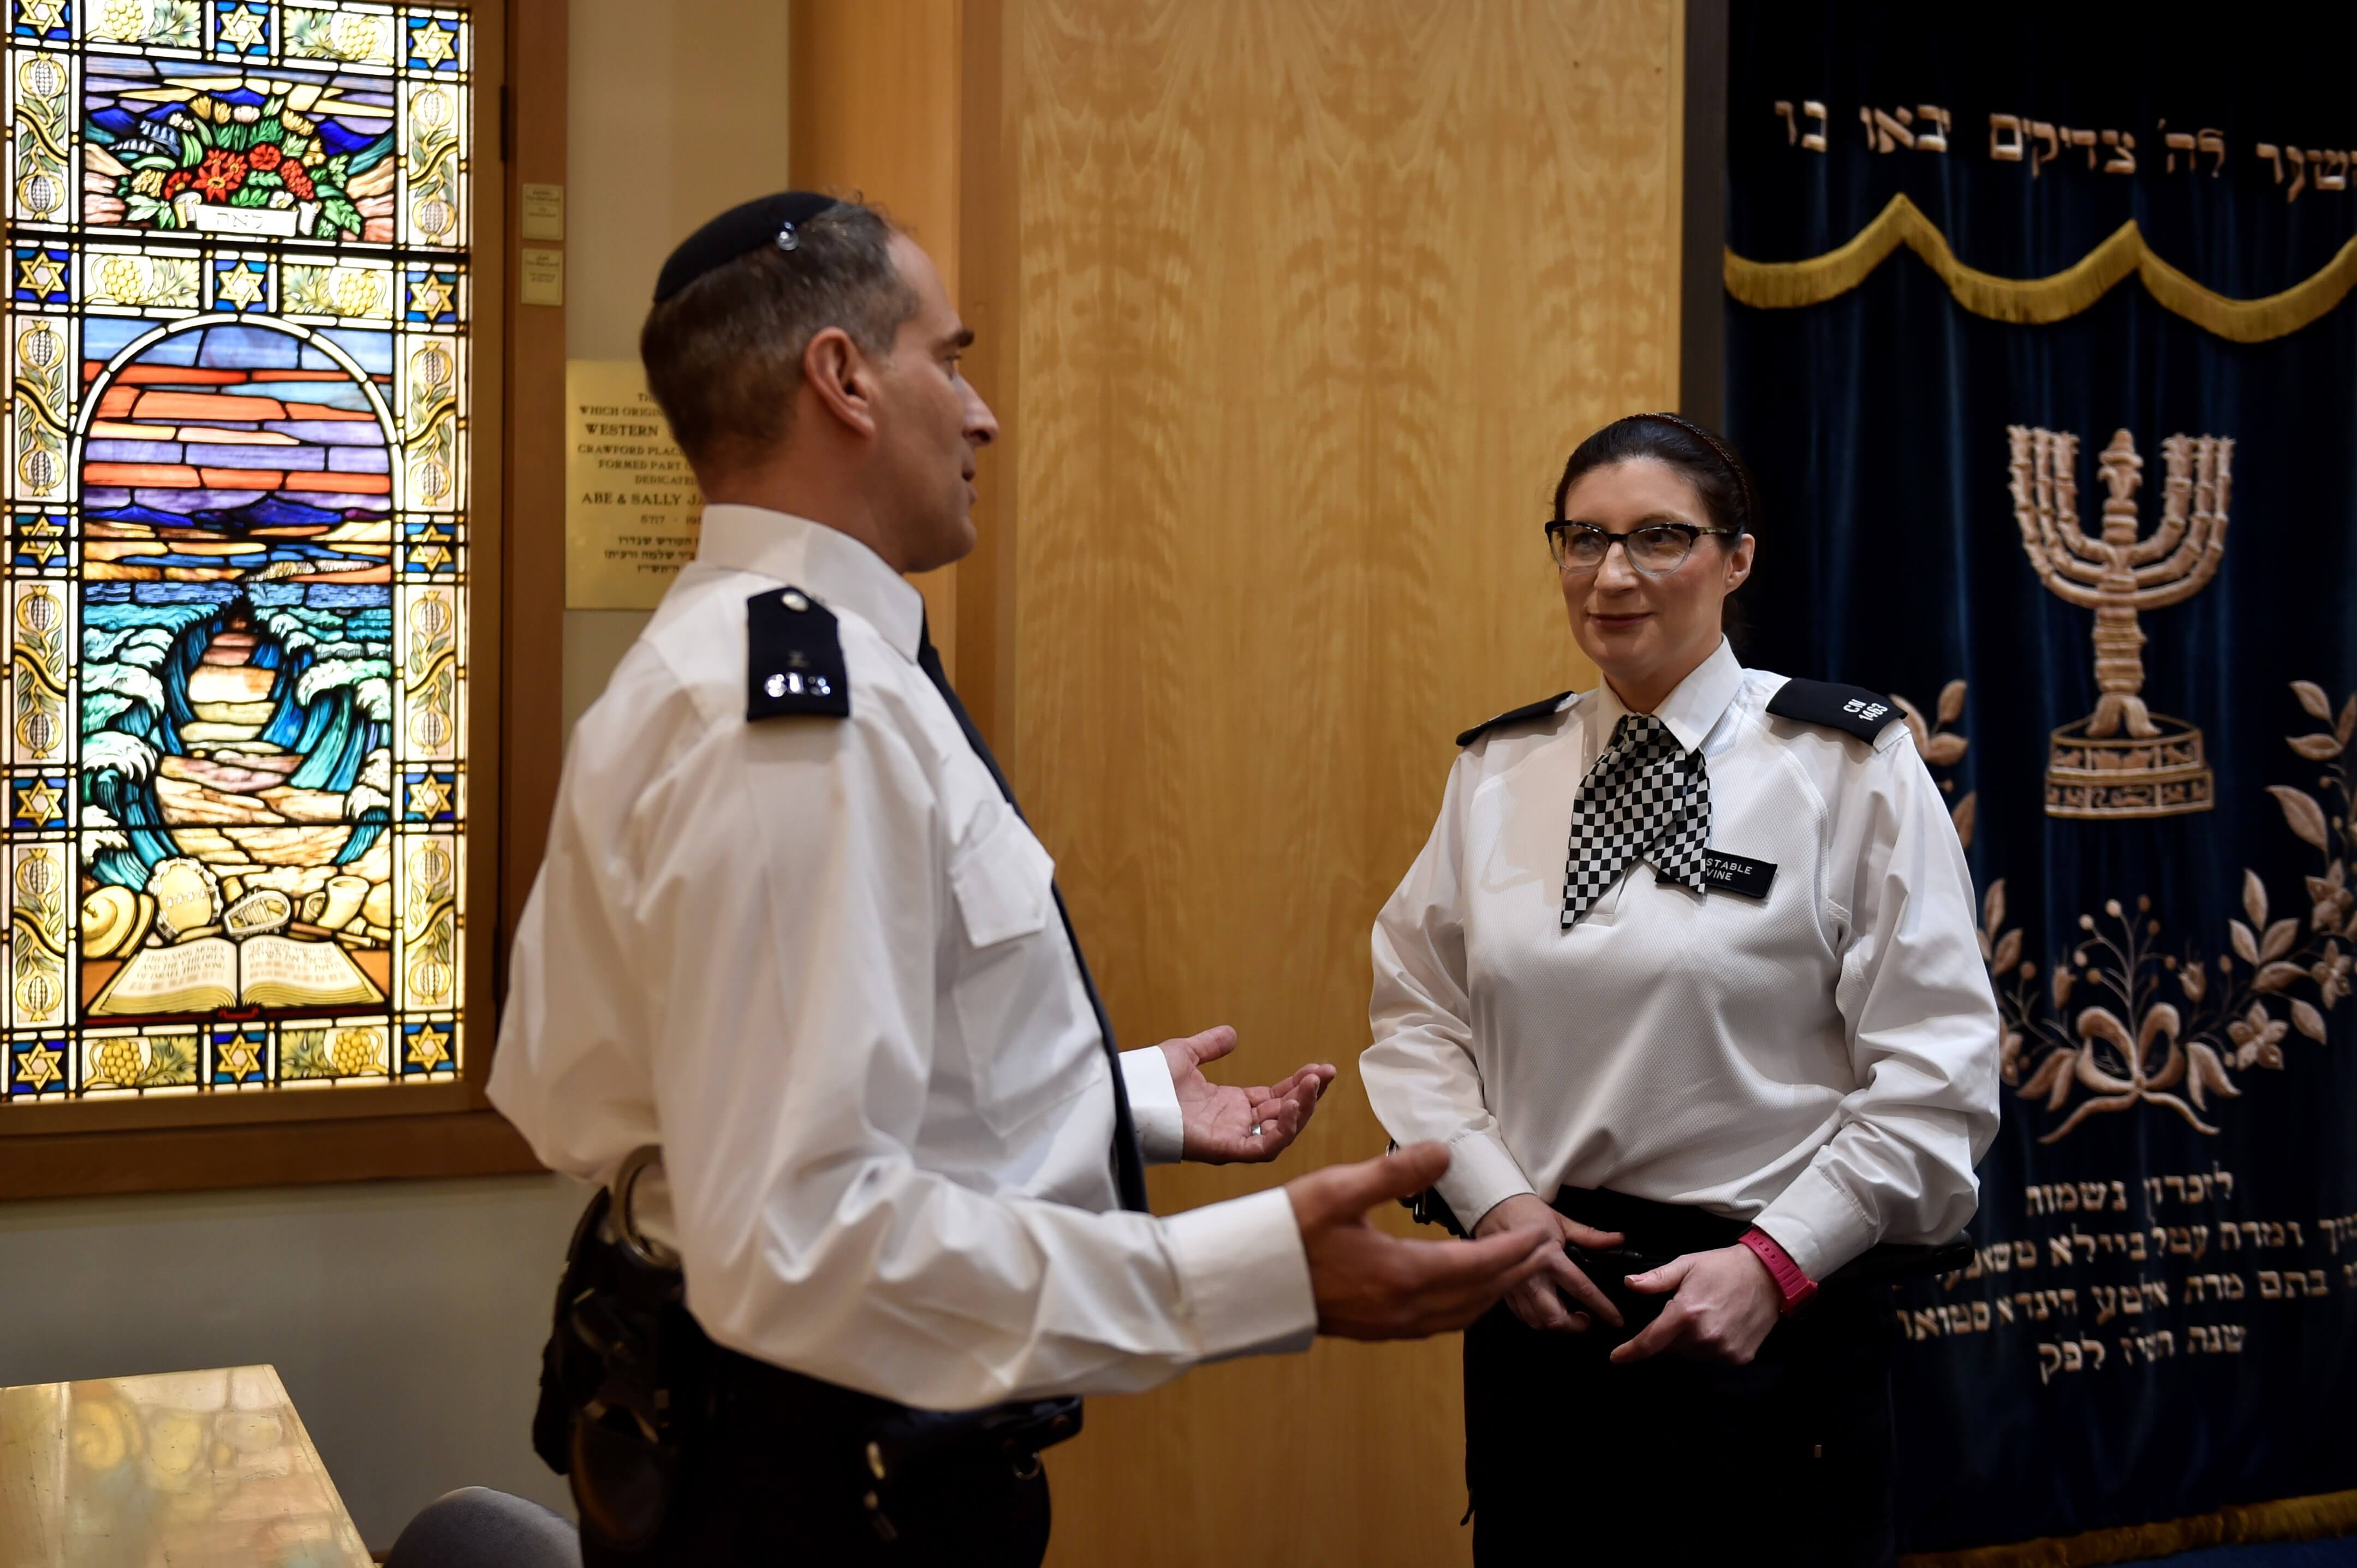 Male and female officers from the Jewish community talking in a synagogue.